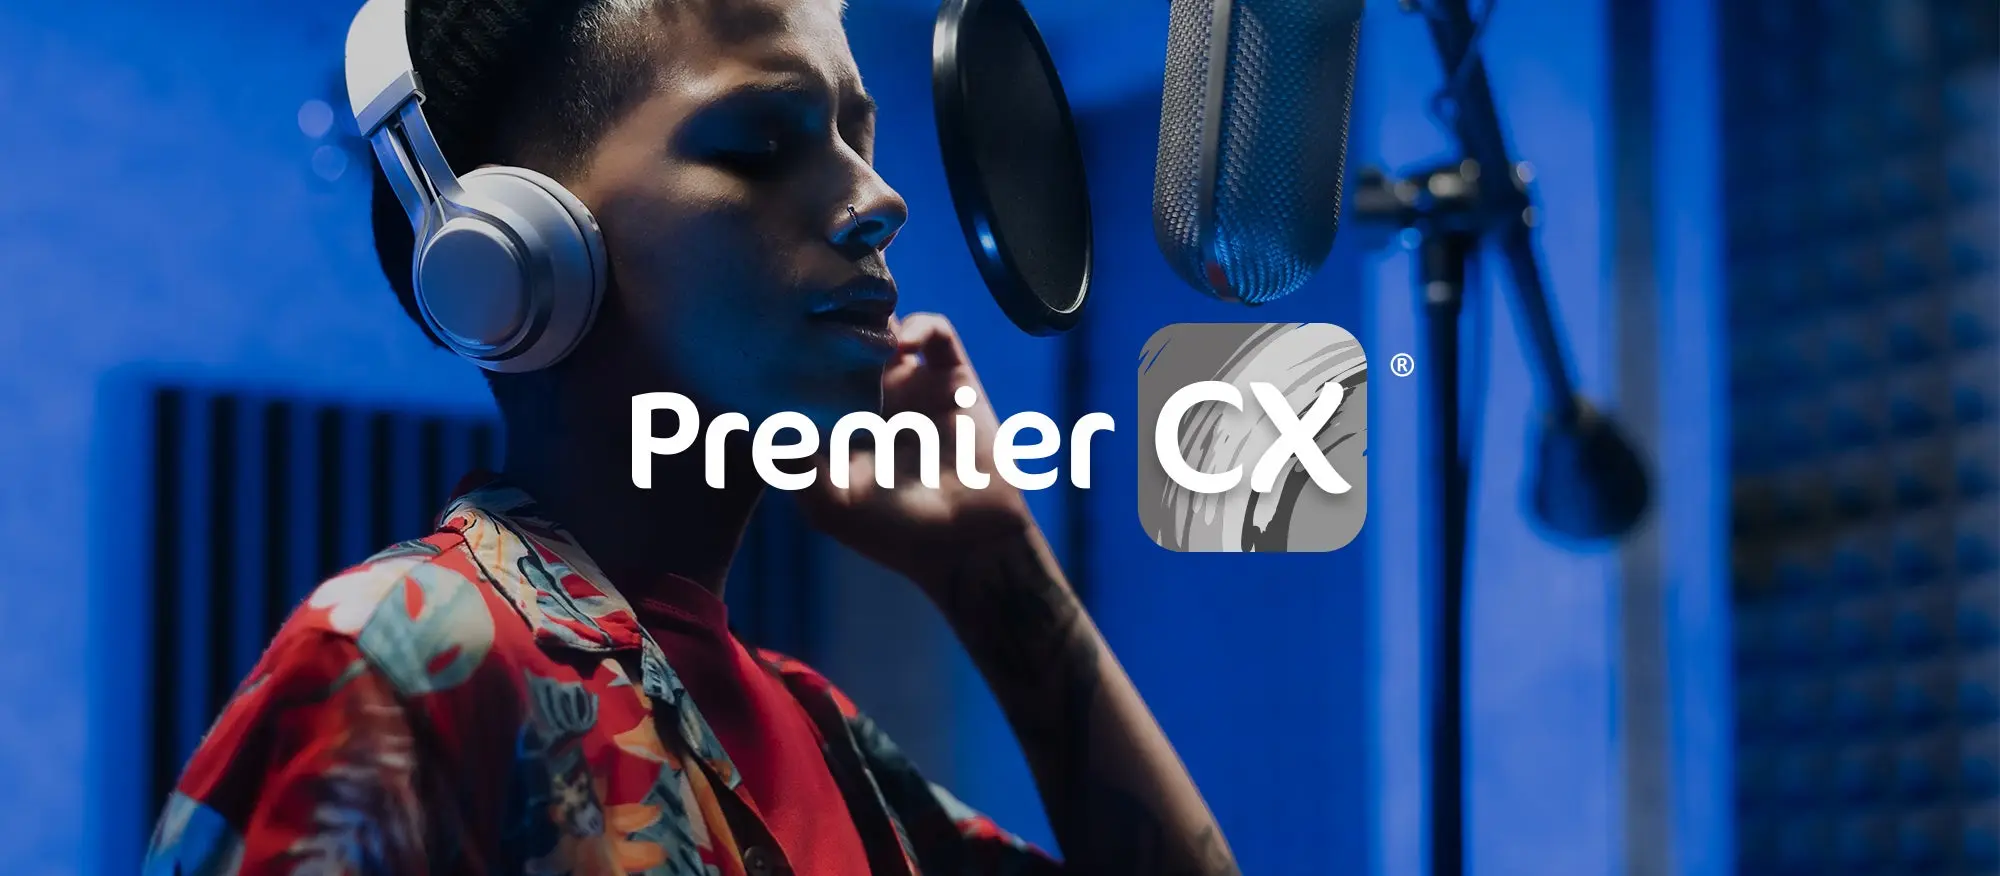 Image of a man in a recording booth with Premier CX logo.